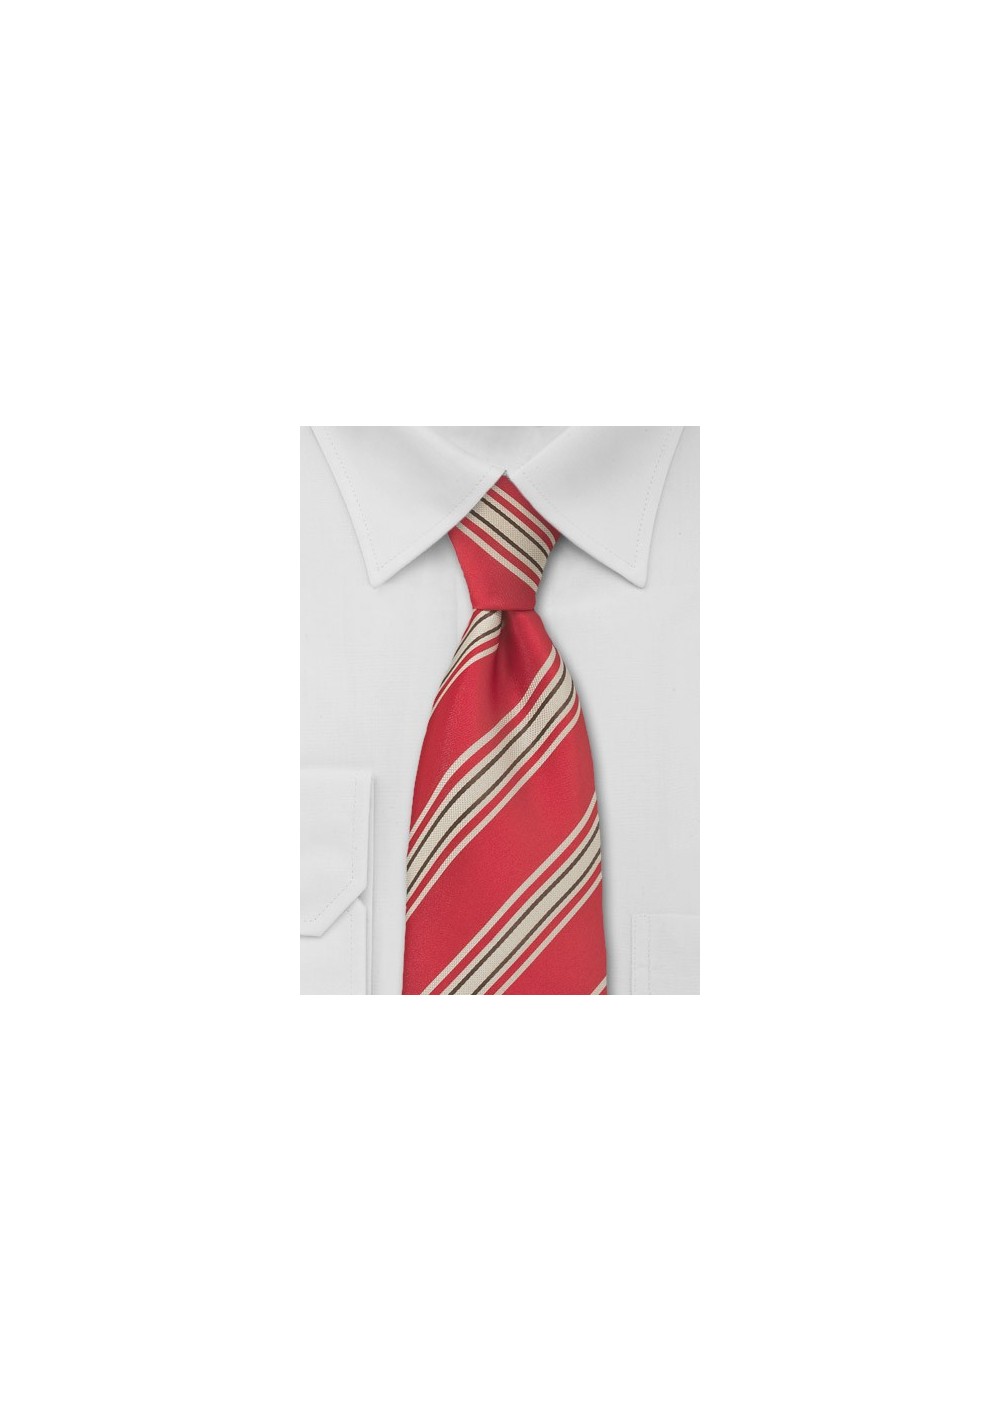 Red and Tan Striped Tie